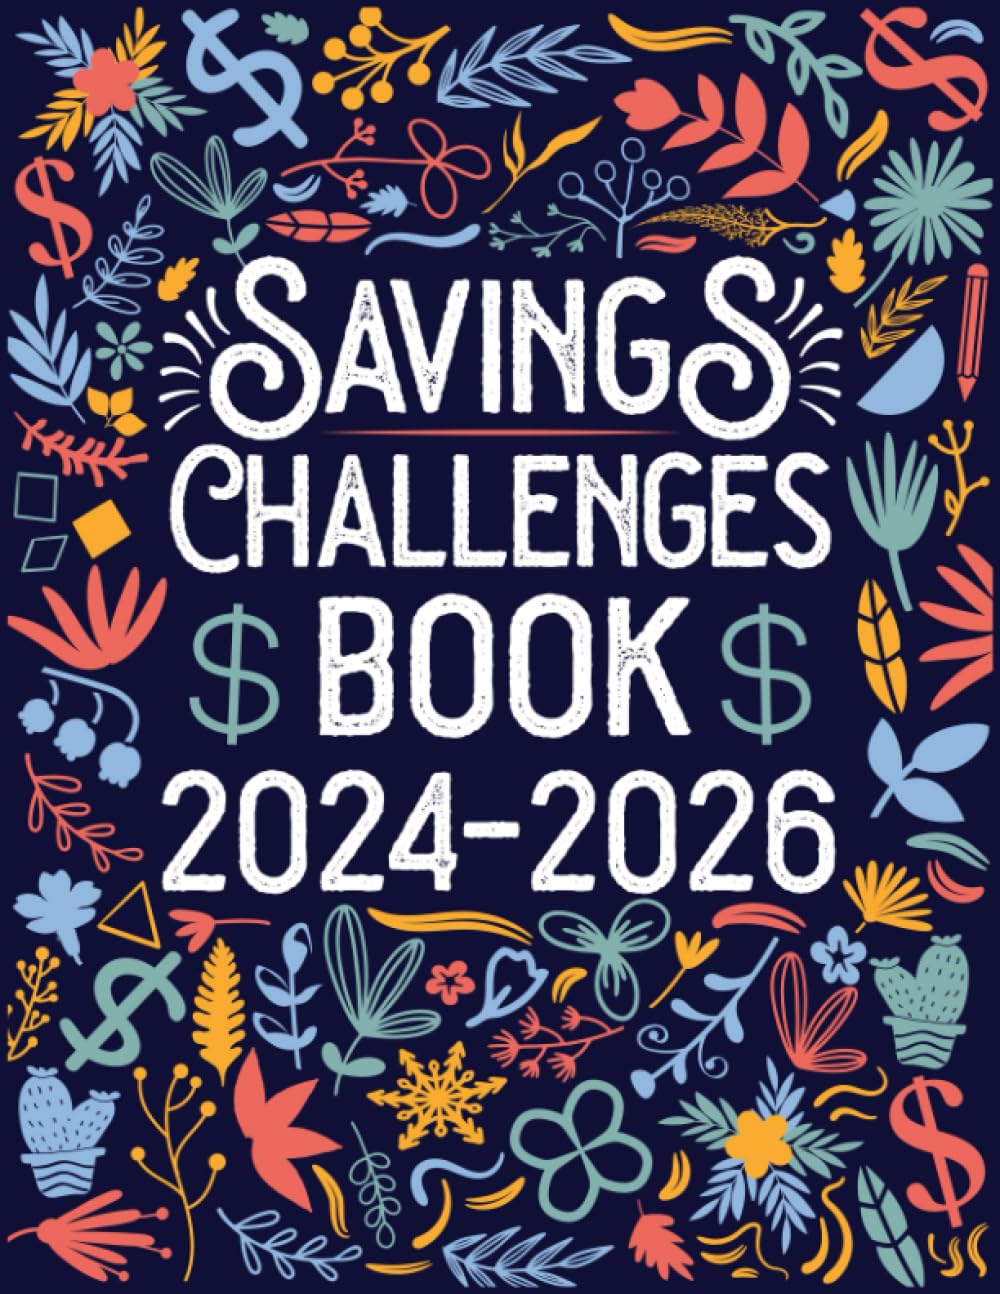 Savings Challenges Book 2024-2026: Planner 2024-2026 Savings Journal | Savings Challenges Book with No Spend Challenge | Money Management for Adults